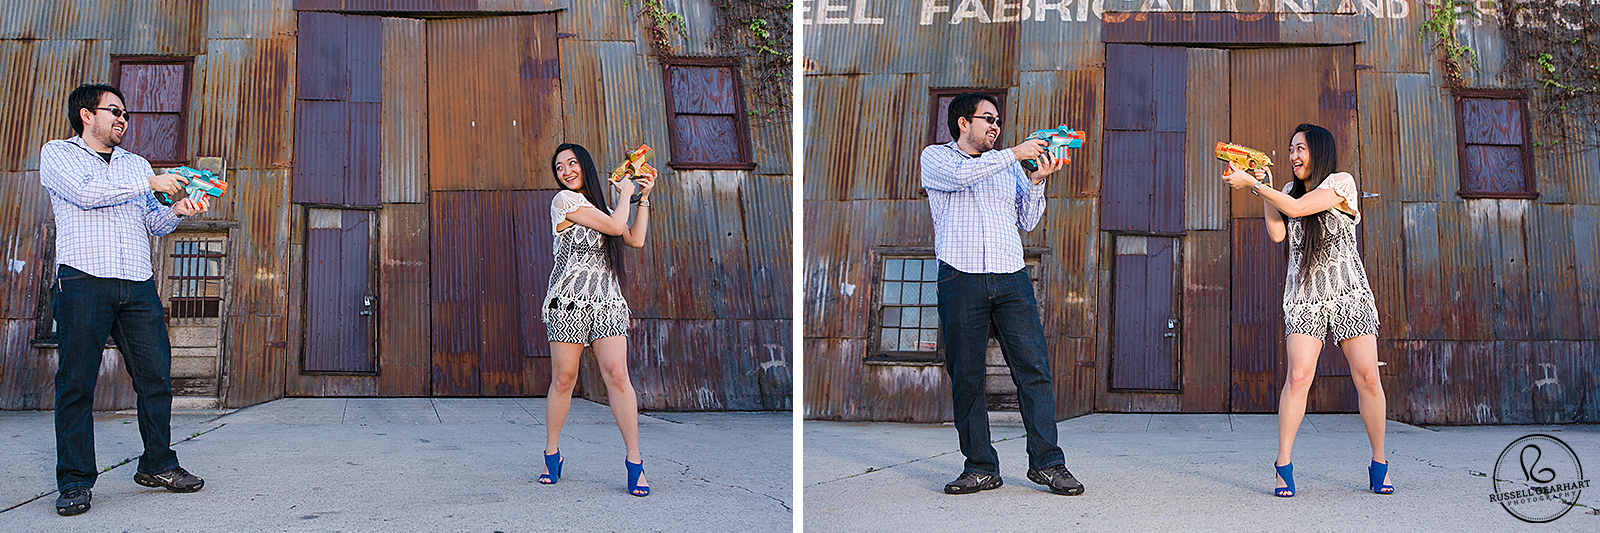 Nerf Gun Engagement Portrait: Los Angeles Industrial Engagement Portraits - Russell Gearhart Photography - www.gearhartphoto.com